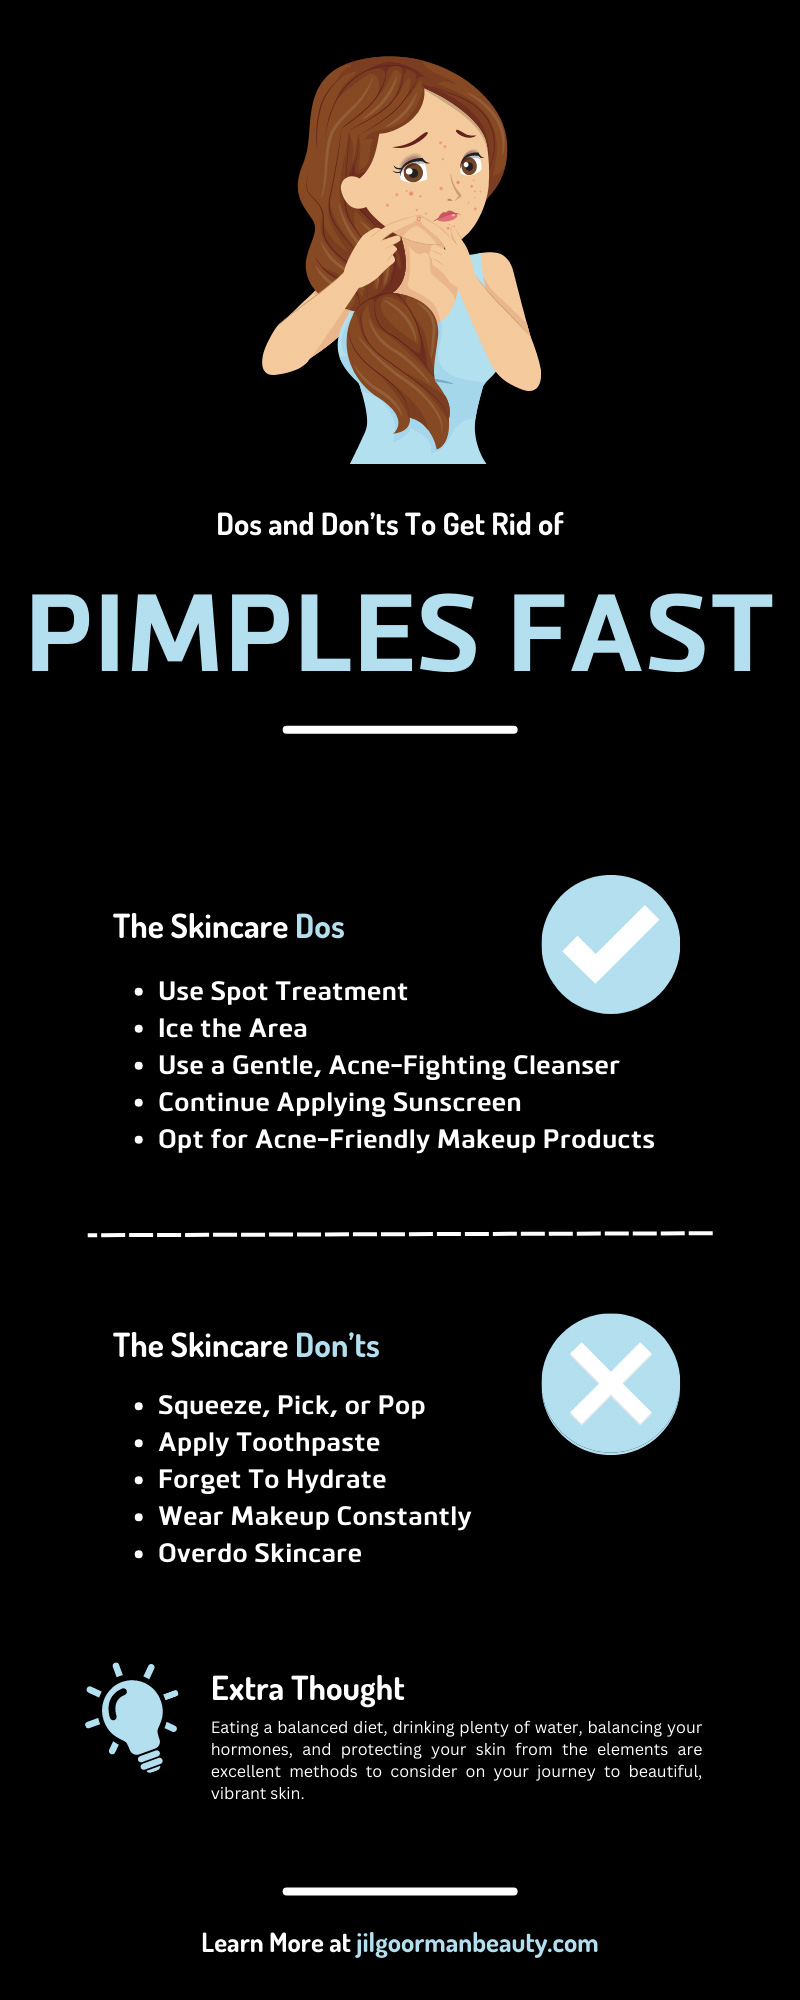 10 Dos and Don’ts To Get Rid of Pimples Fast